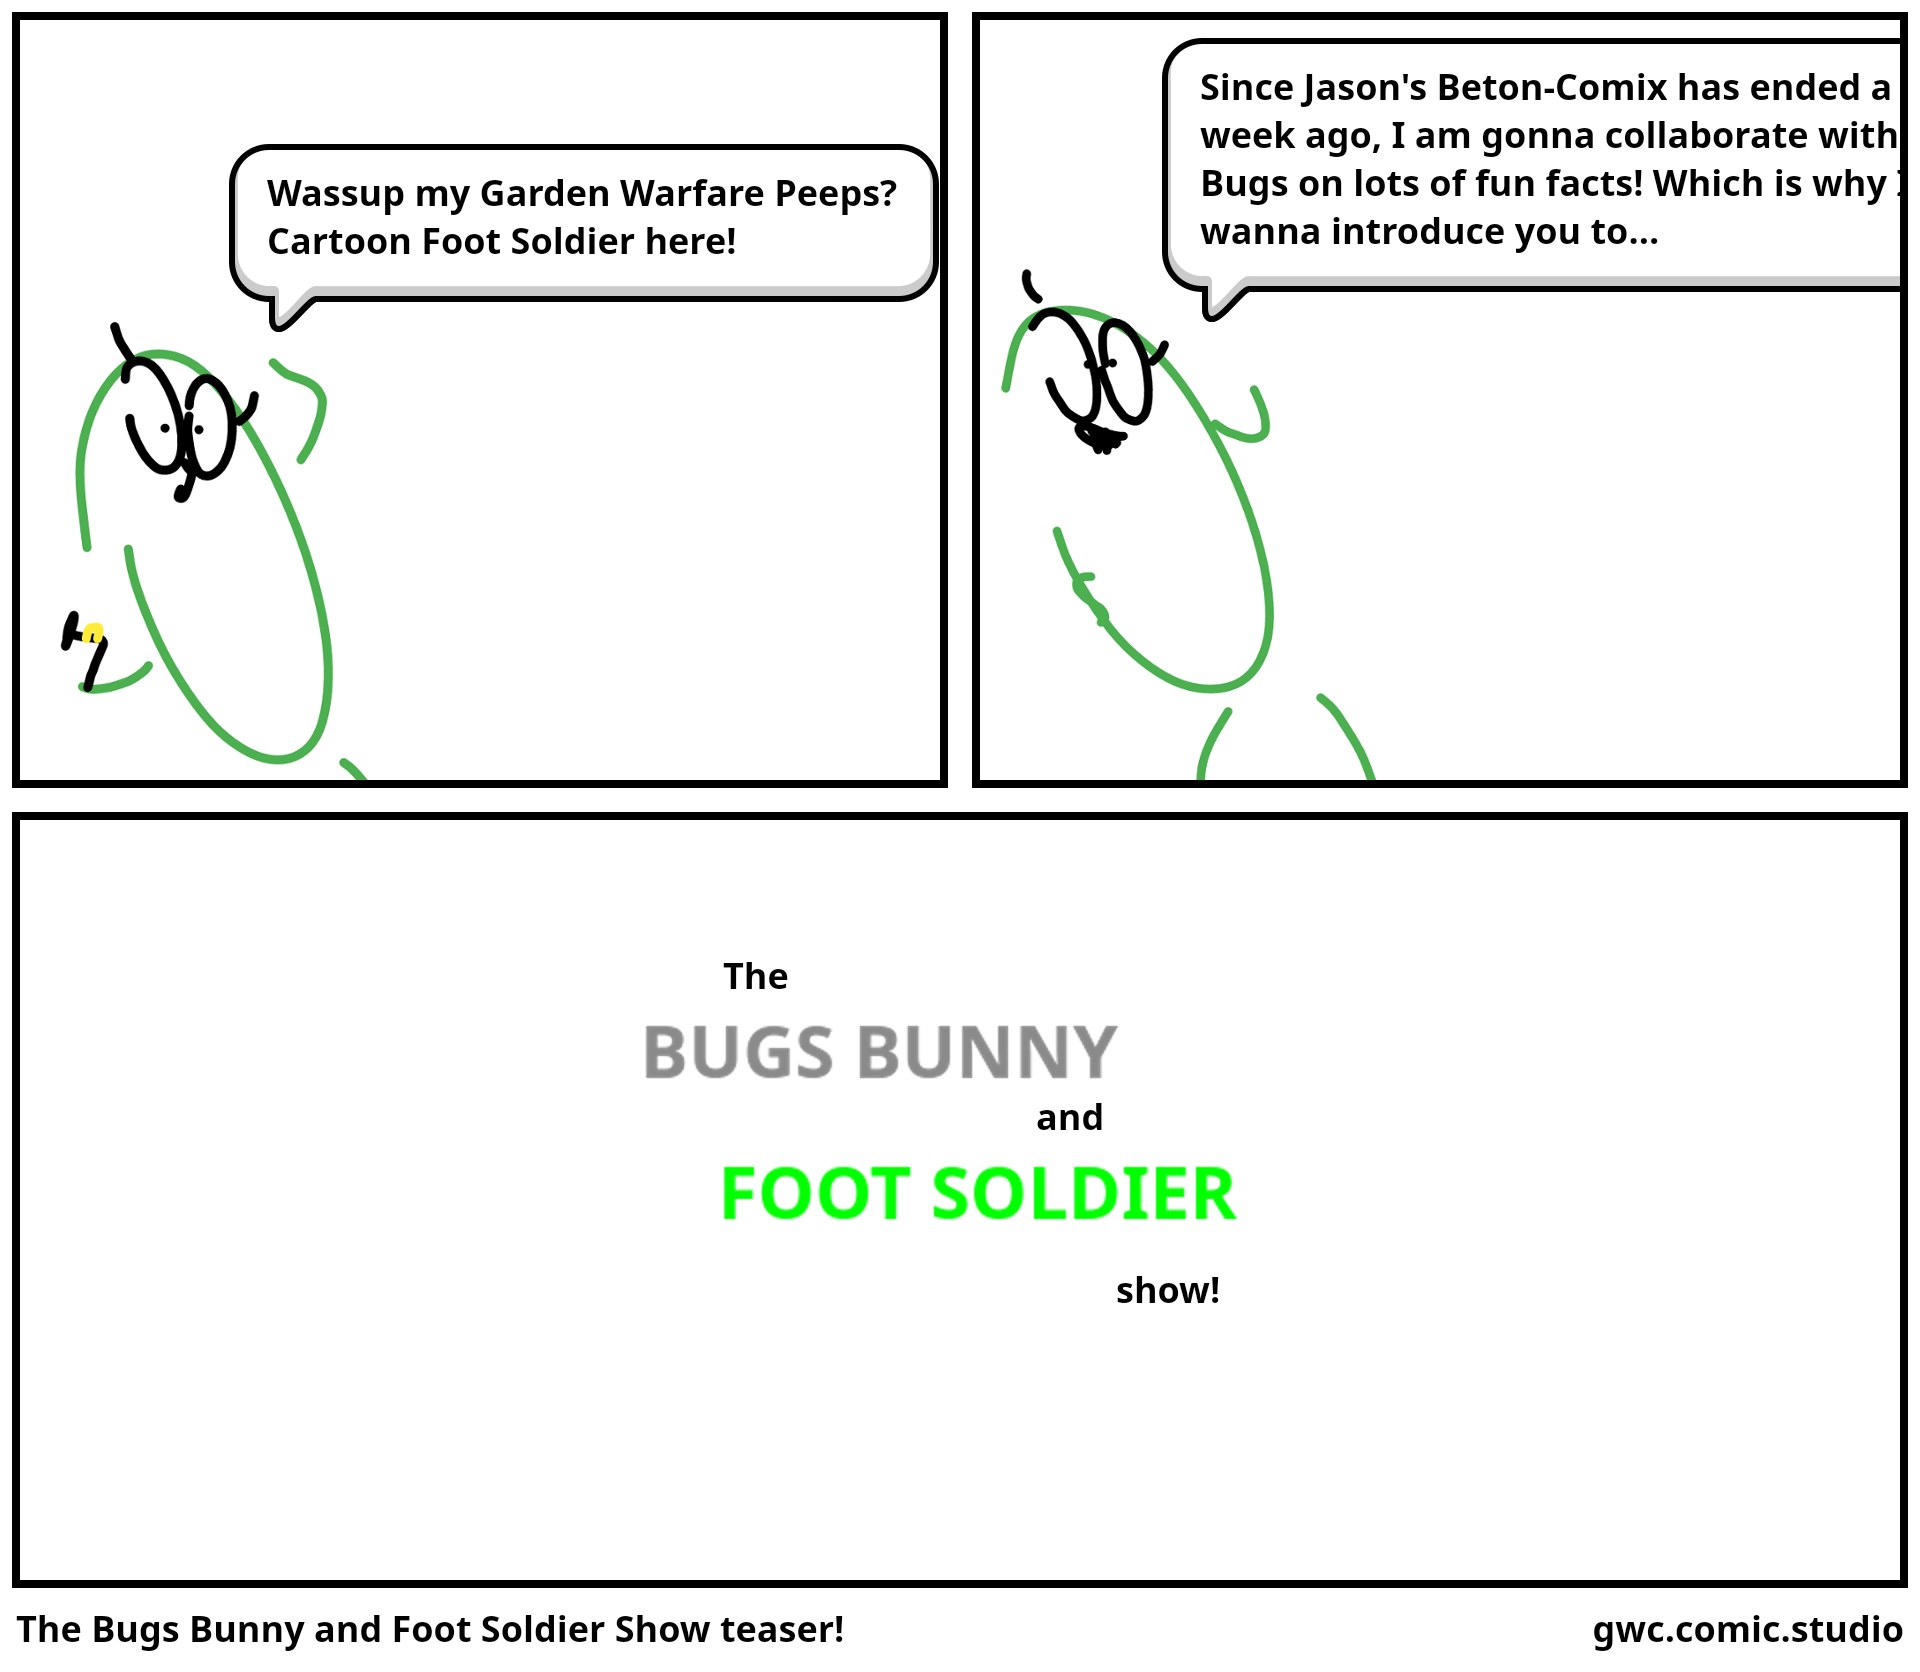 The Bugs Bunny and Foot Soldier Show teaser!